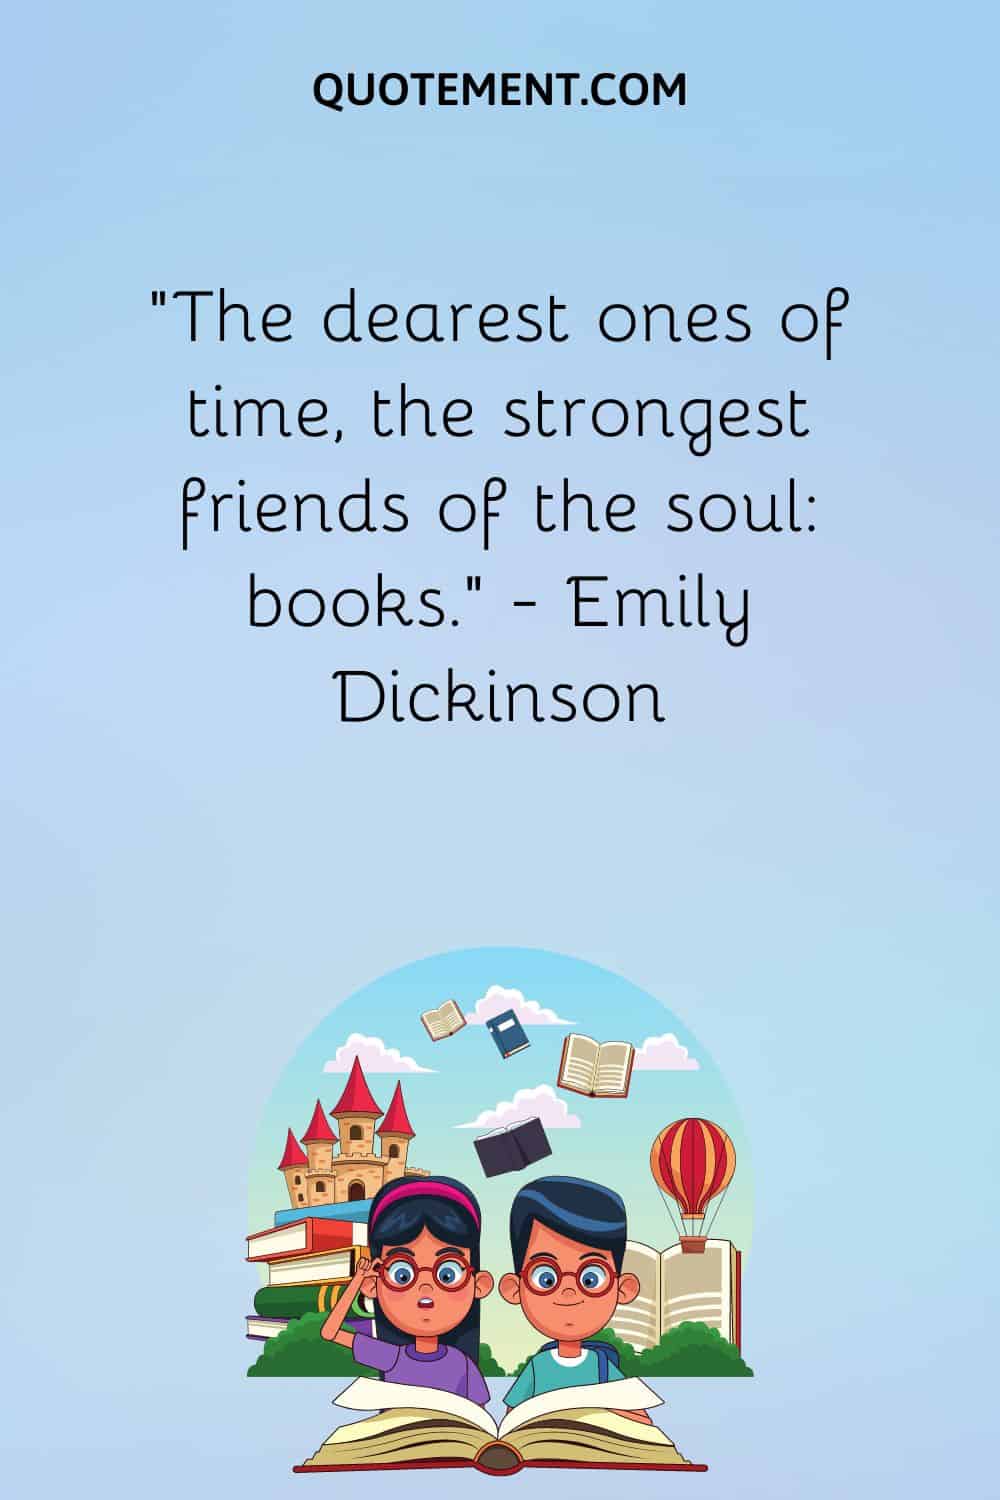 “The dearest ones of time, the strongest friends of the soul books.” — Emily Dickinson